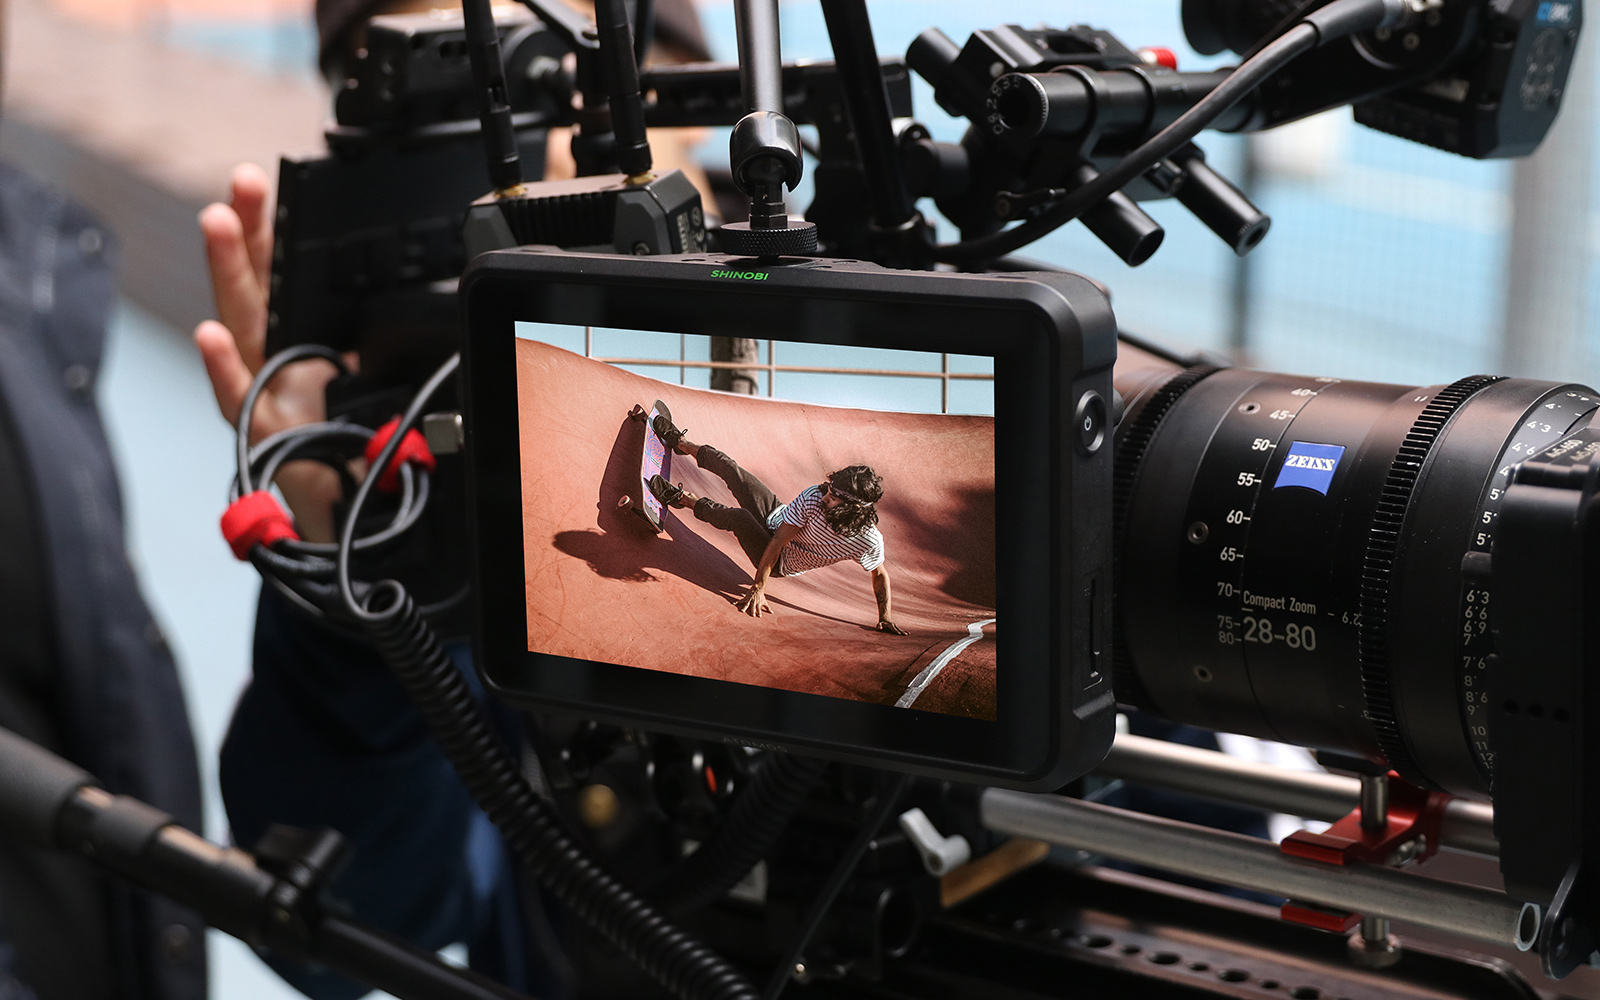 Atomos Shinobi 7 promotional image showing the monitor setup for a camera assistant on the side of the camera with a cine arm mount.